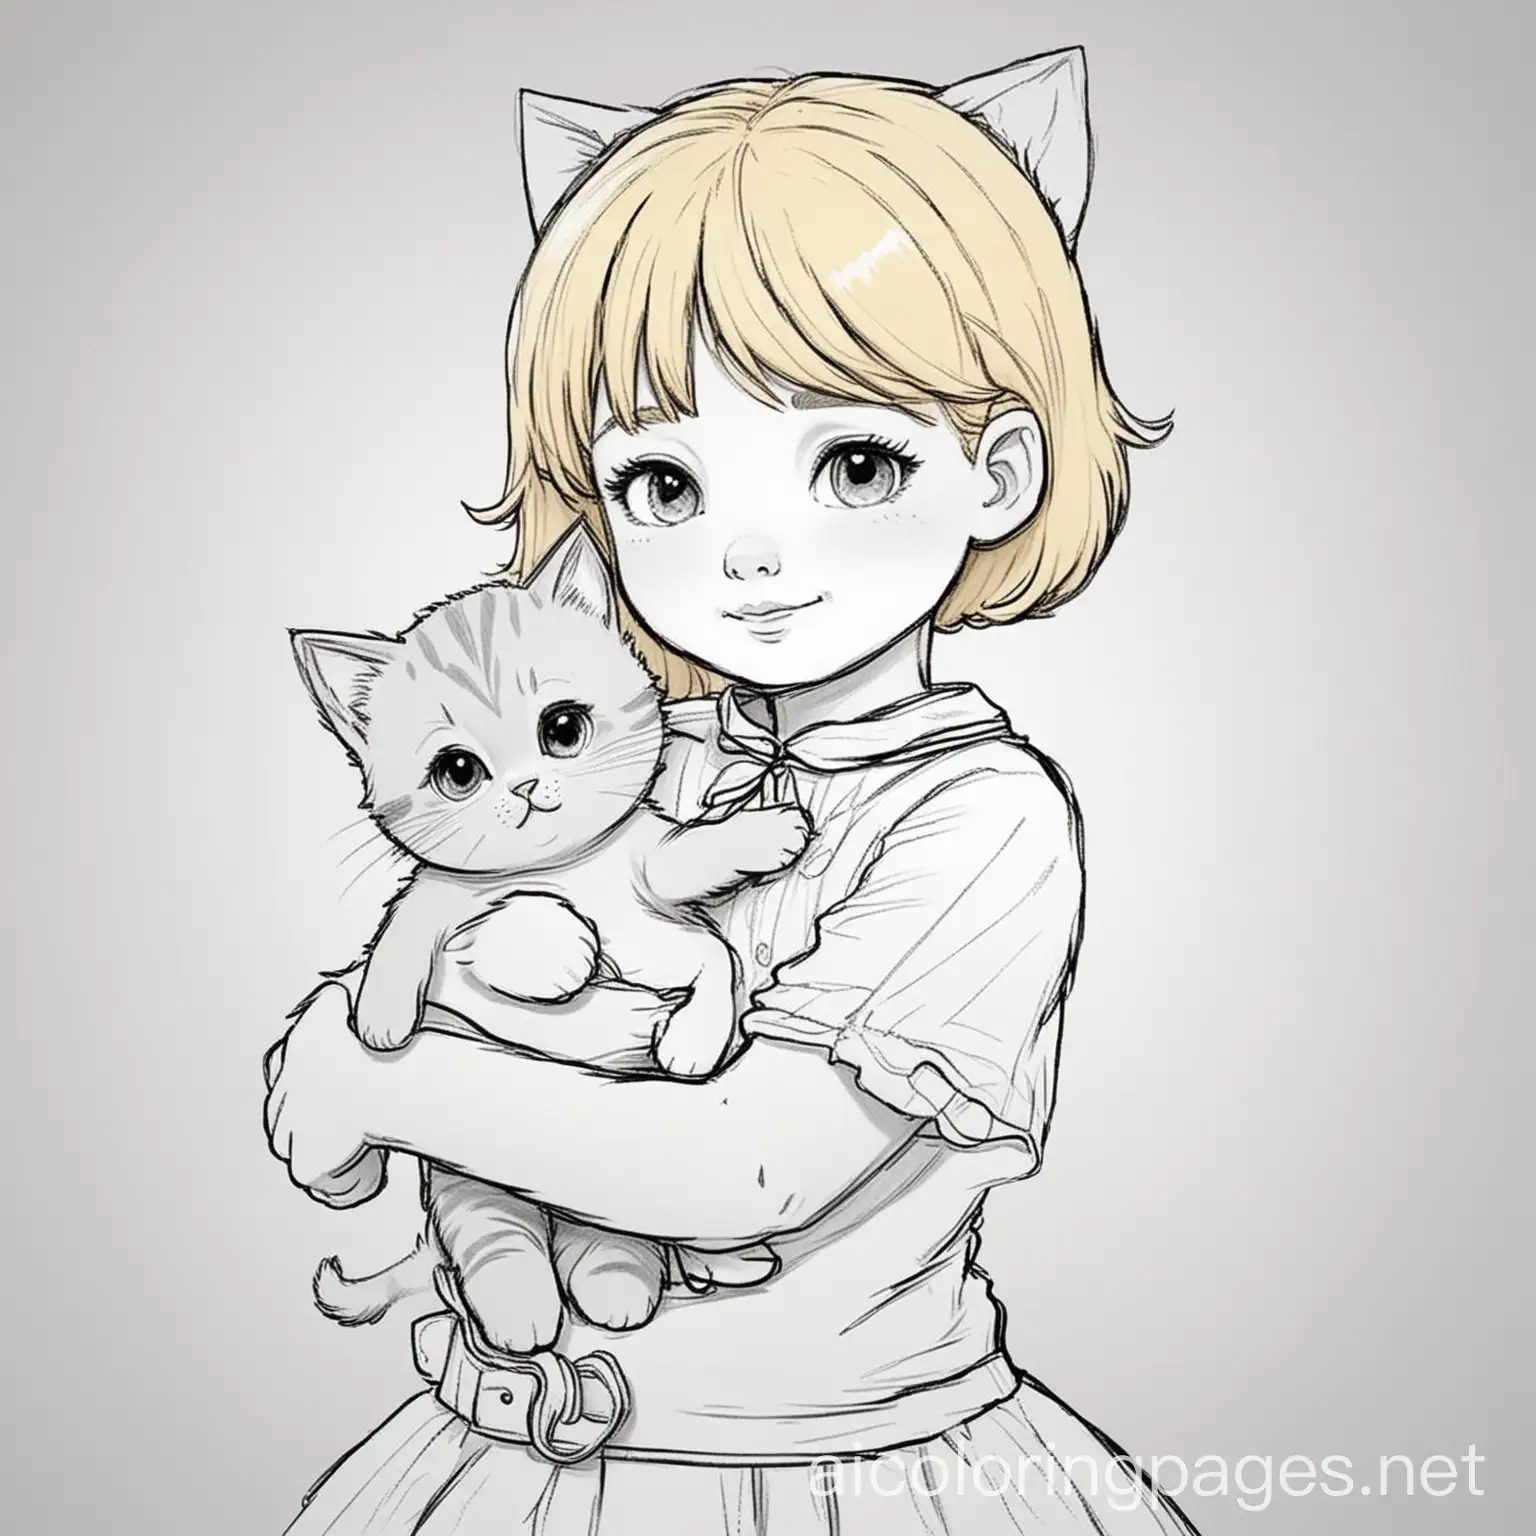 Young-Girl-Holding-Cat-Coloring-Page-Simple-Black-and-White-Line-Art-for-Easy-Coloring